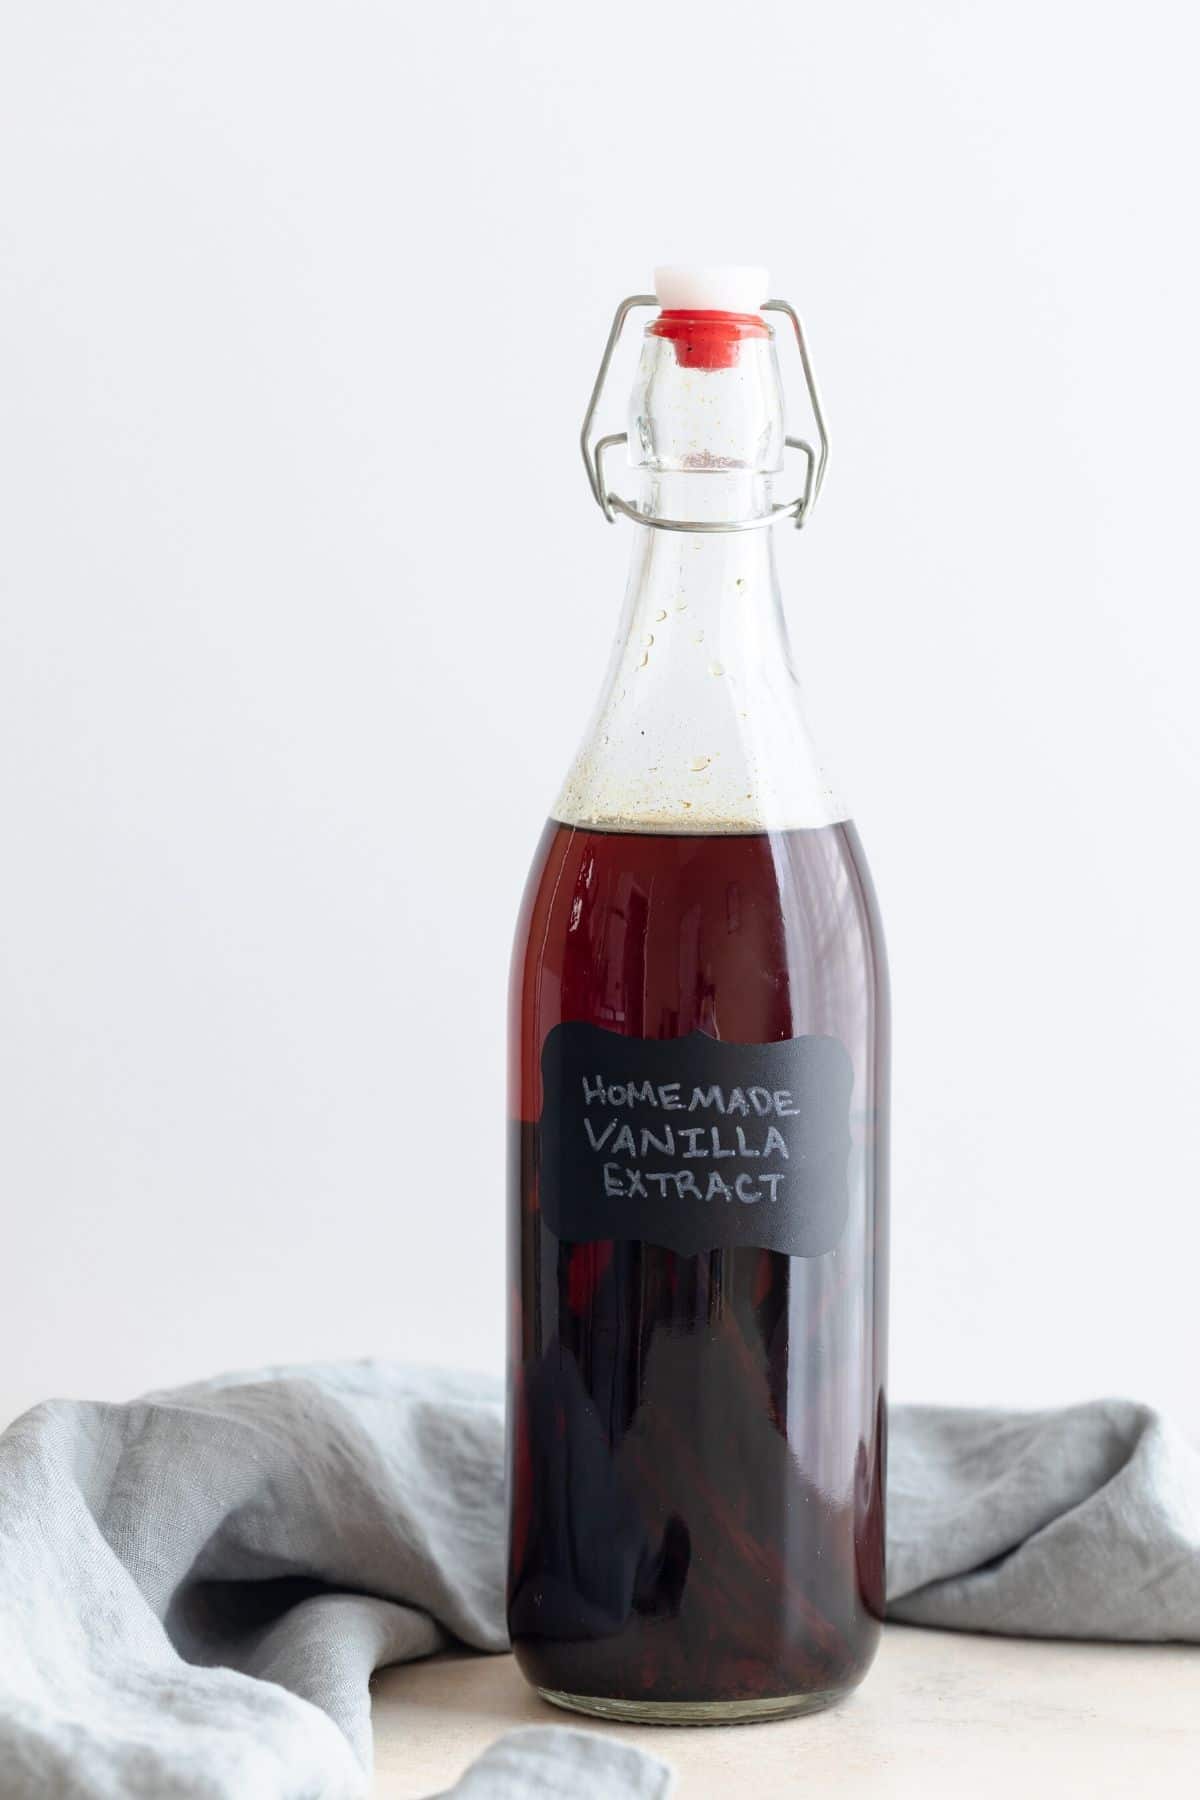 Aged vanilla extract in a clear glass jar